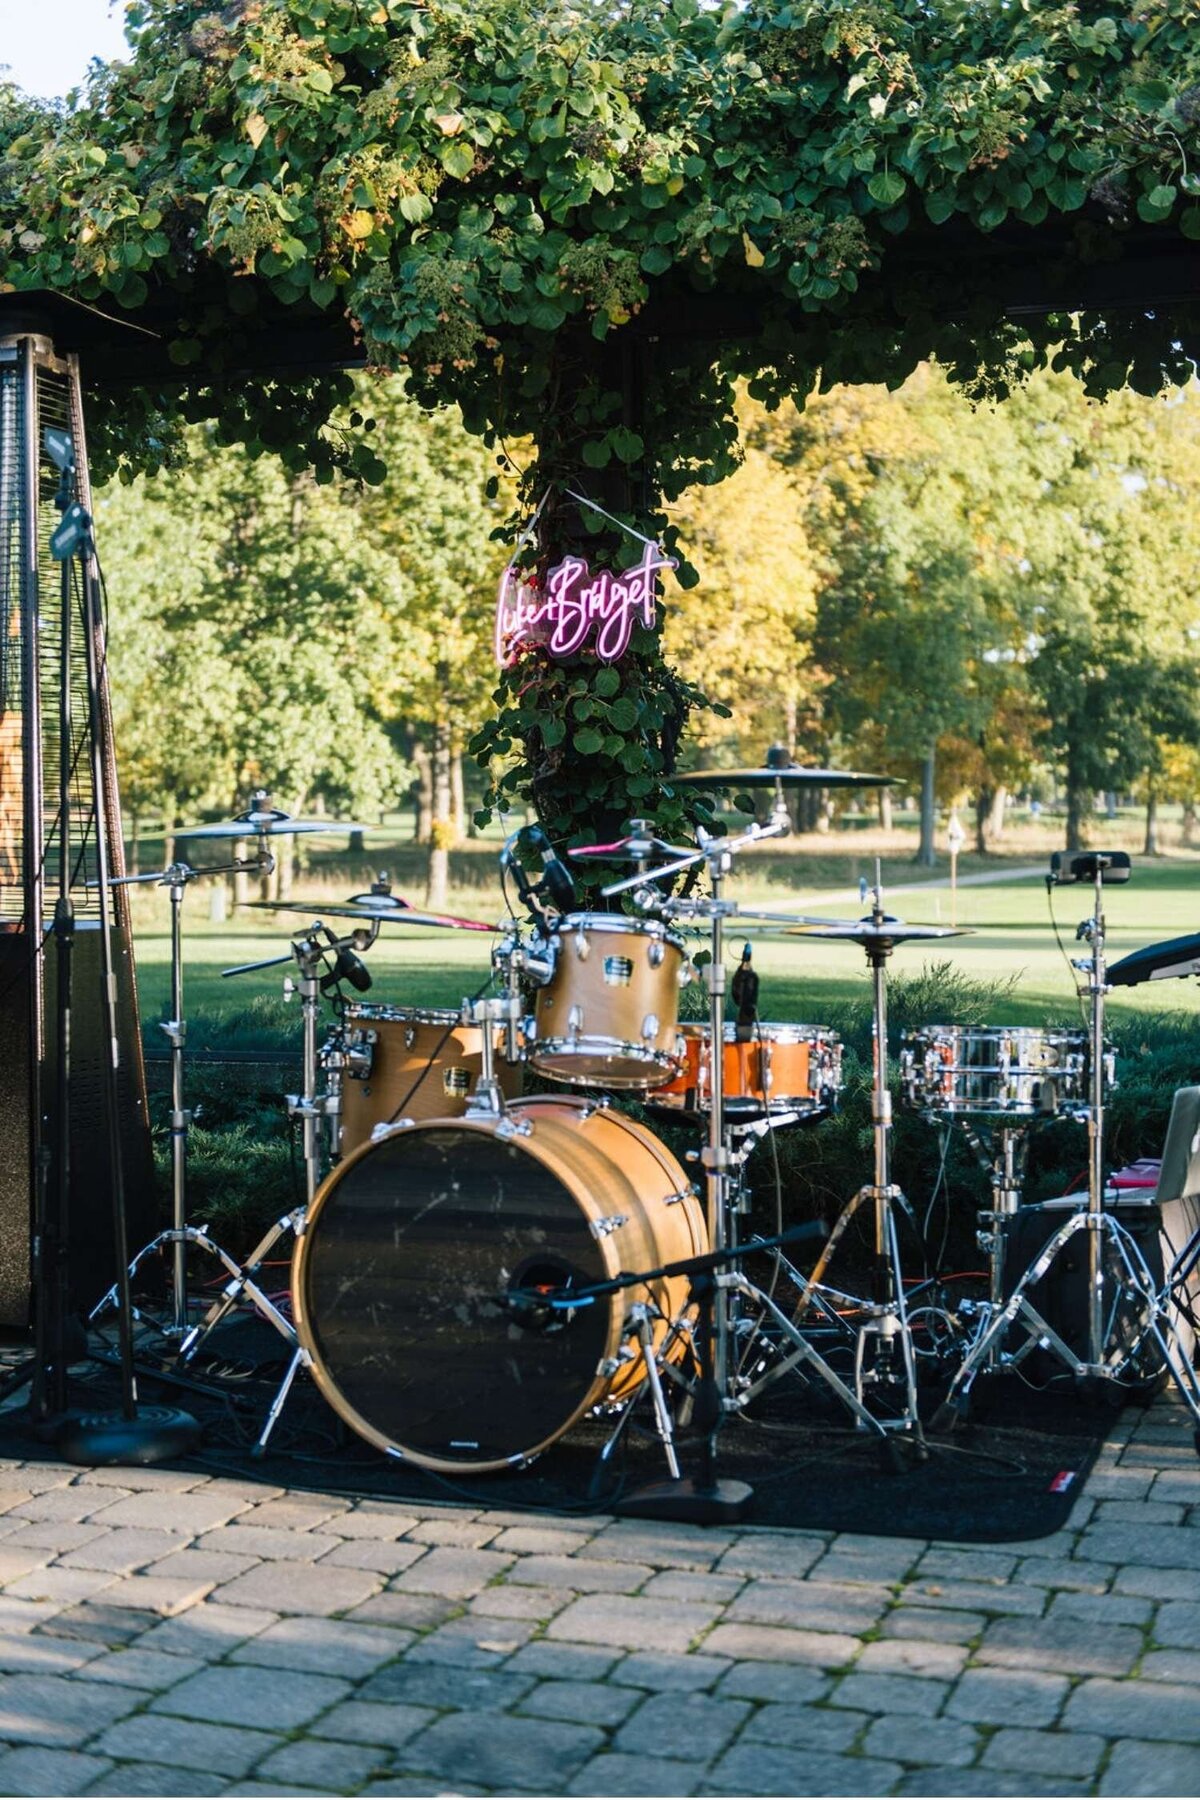 Reception Band Sets Up on the Outdoor Patio of a Tented Luxury Michigan Lakefront Golf Club Wedding.